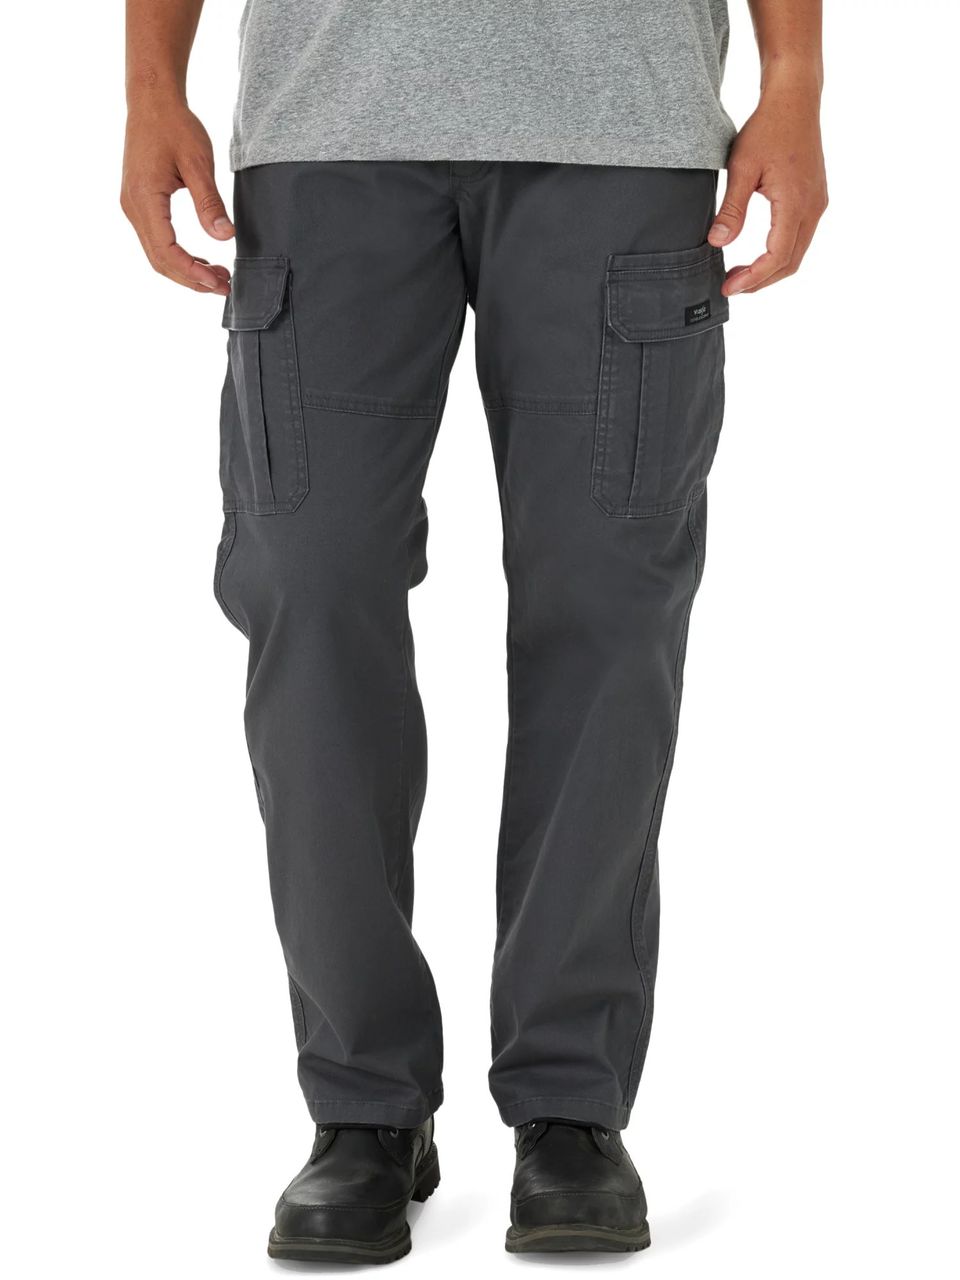 Wrangler relaxed fit cargo pants